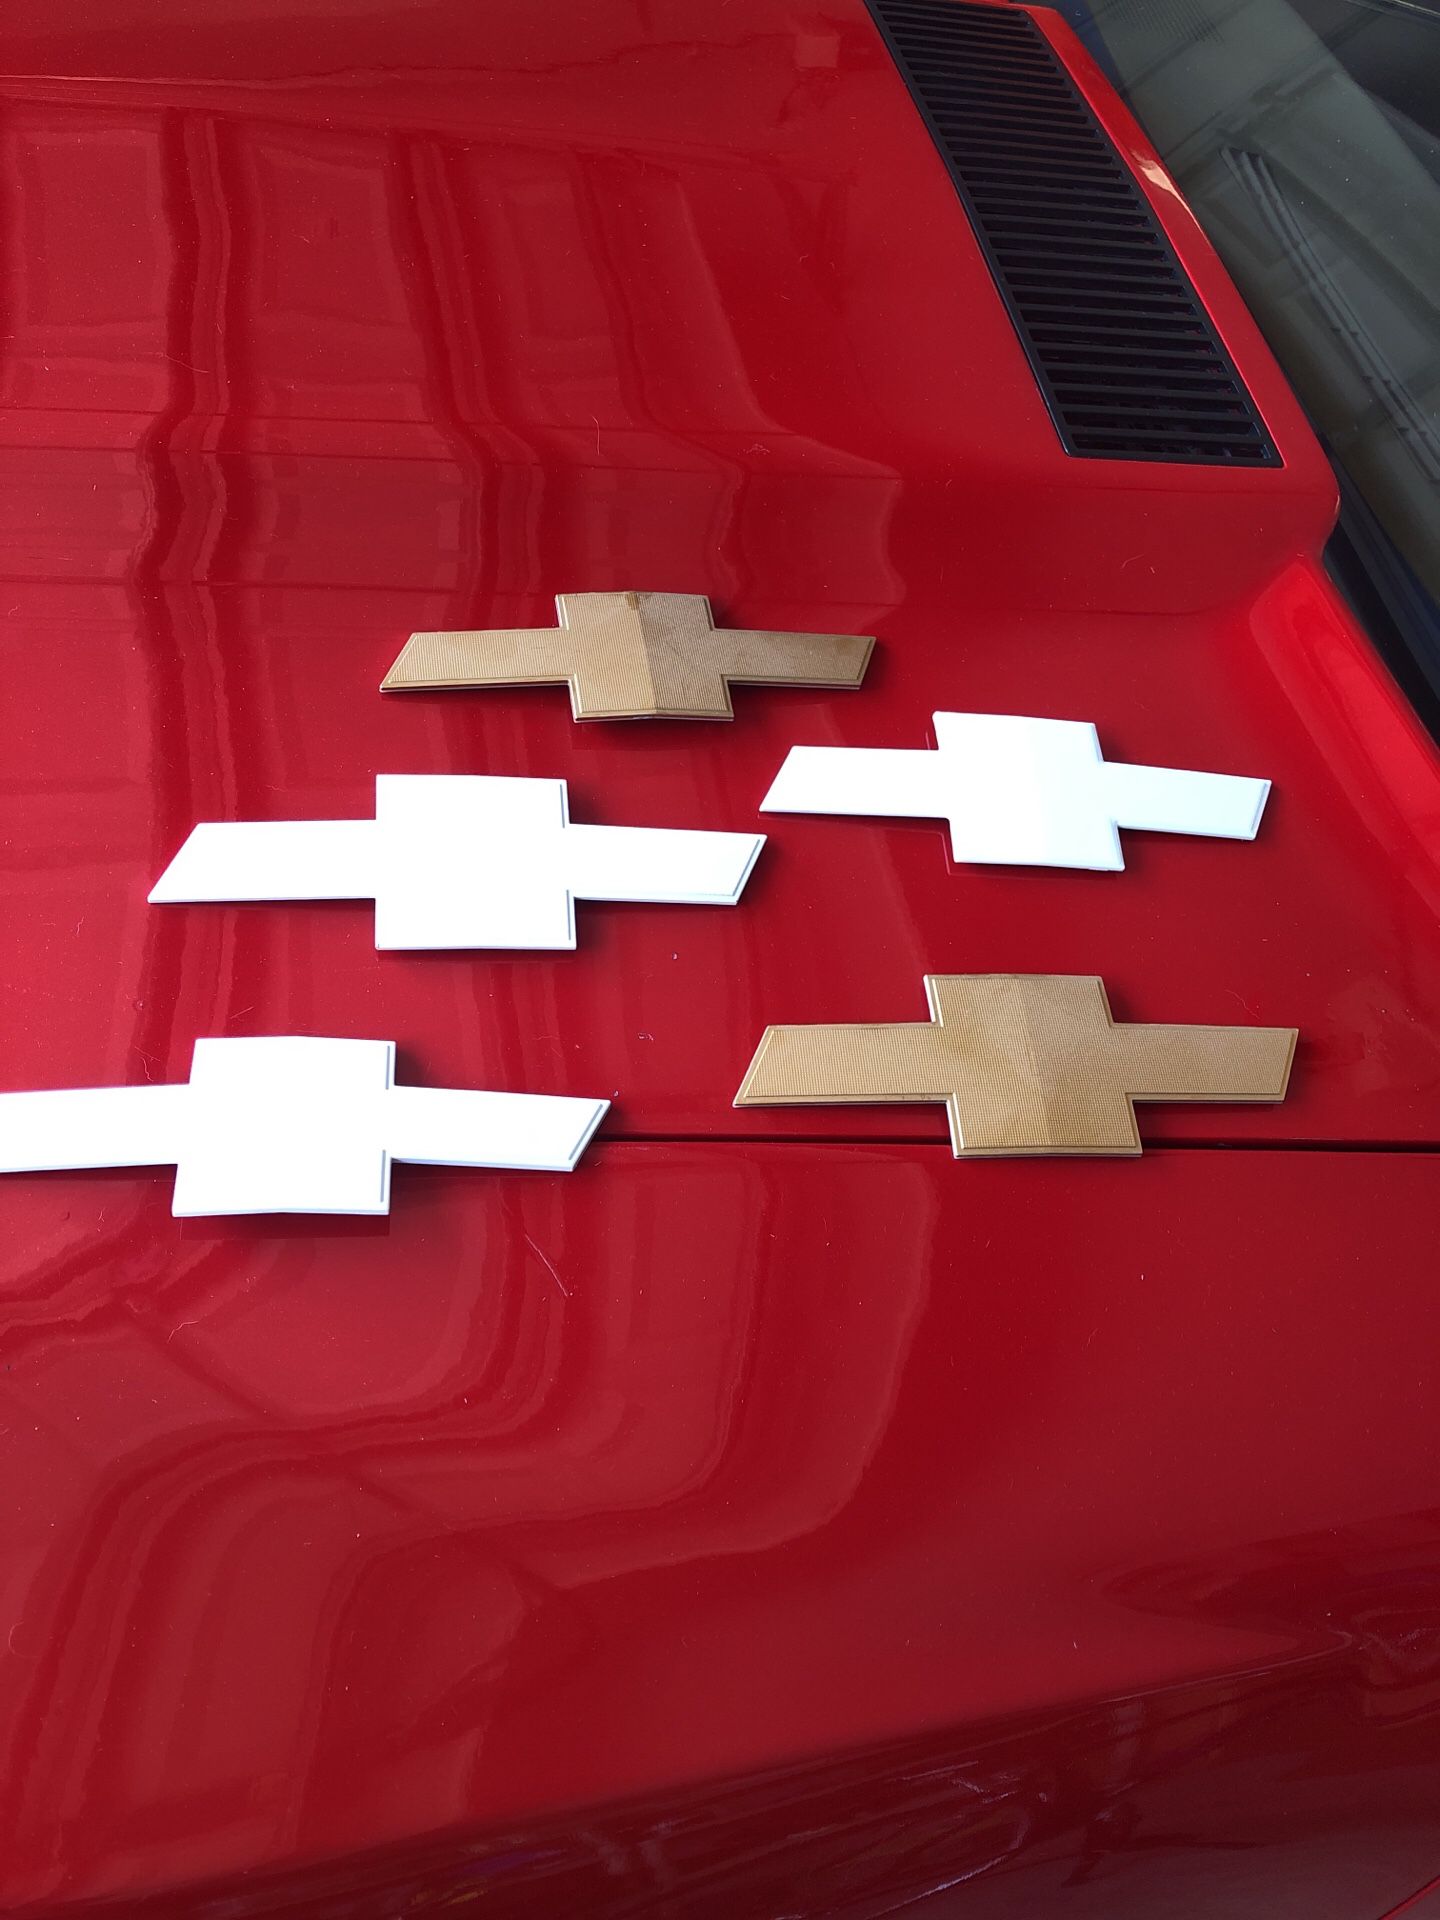 Chevy bow ties from Colorado truck can paint any color